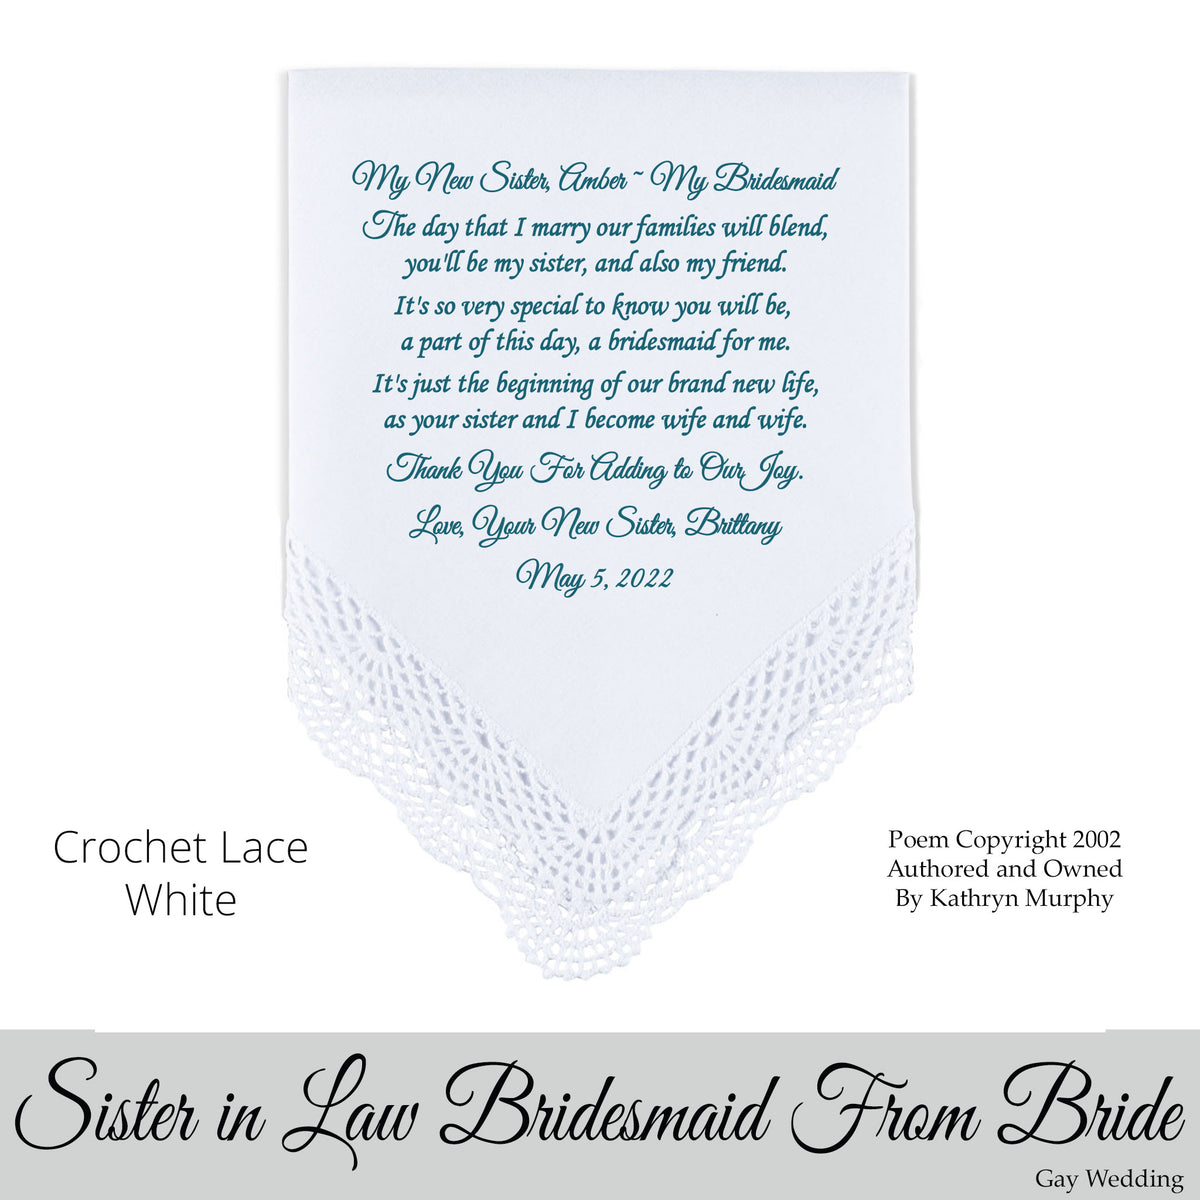 Gay Wedding Gift for the sister-in-law bridesmaid of the bride poem printed wedding hankie